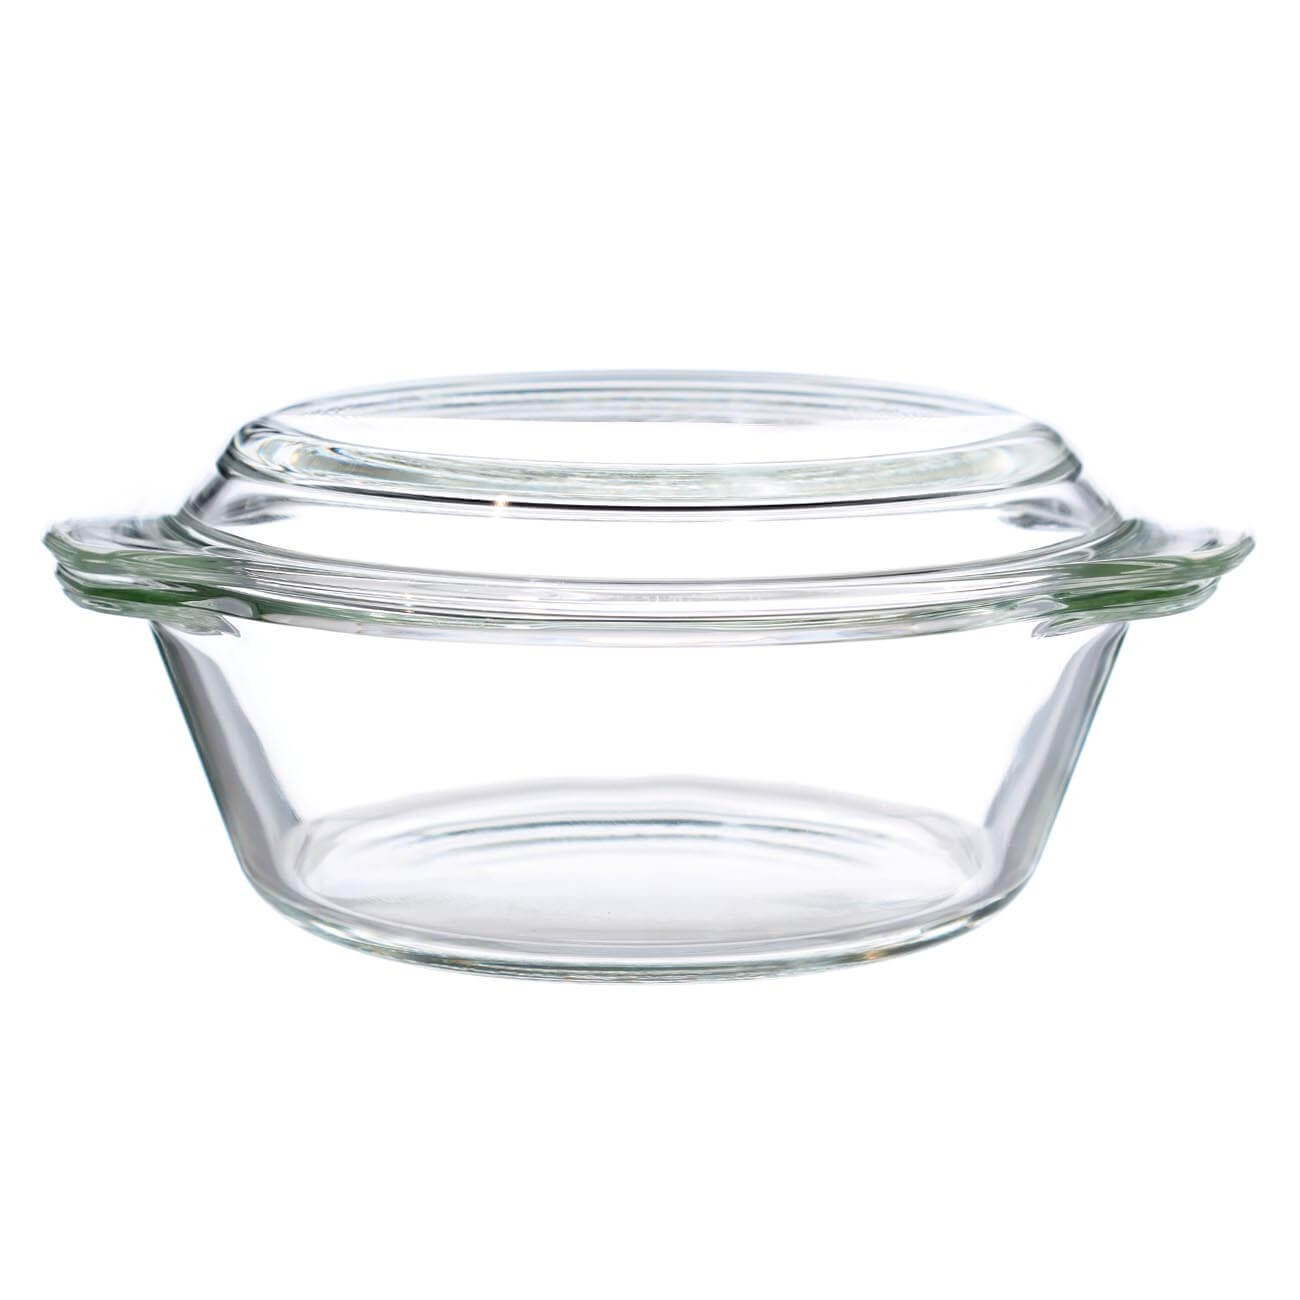 Baking dish, 22 cm, 1,5 l, with lid, Glass T, round, Cook изображение № 1